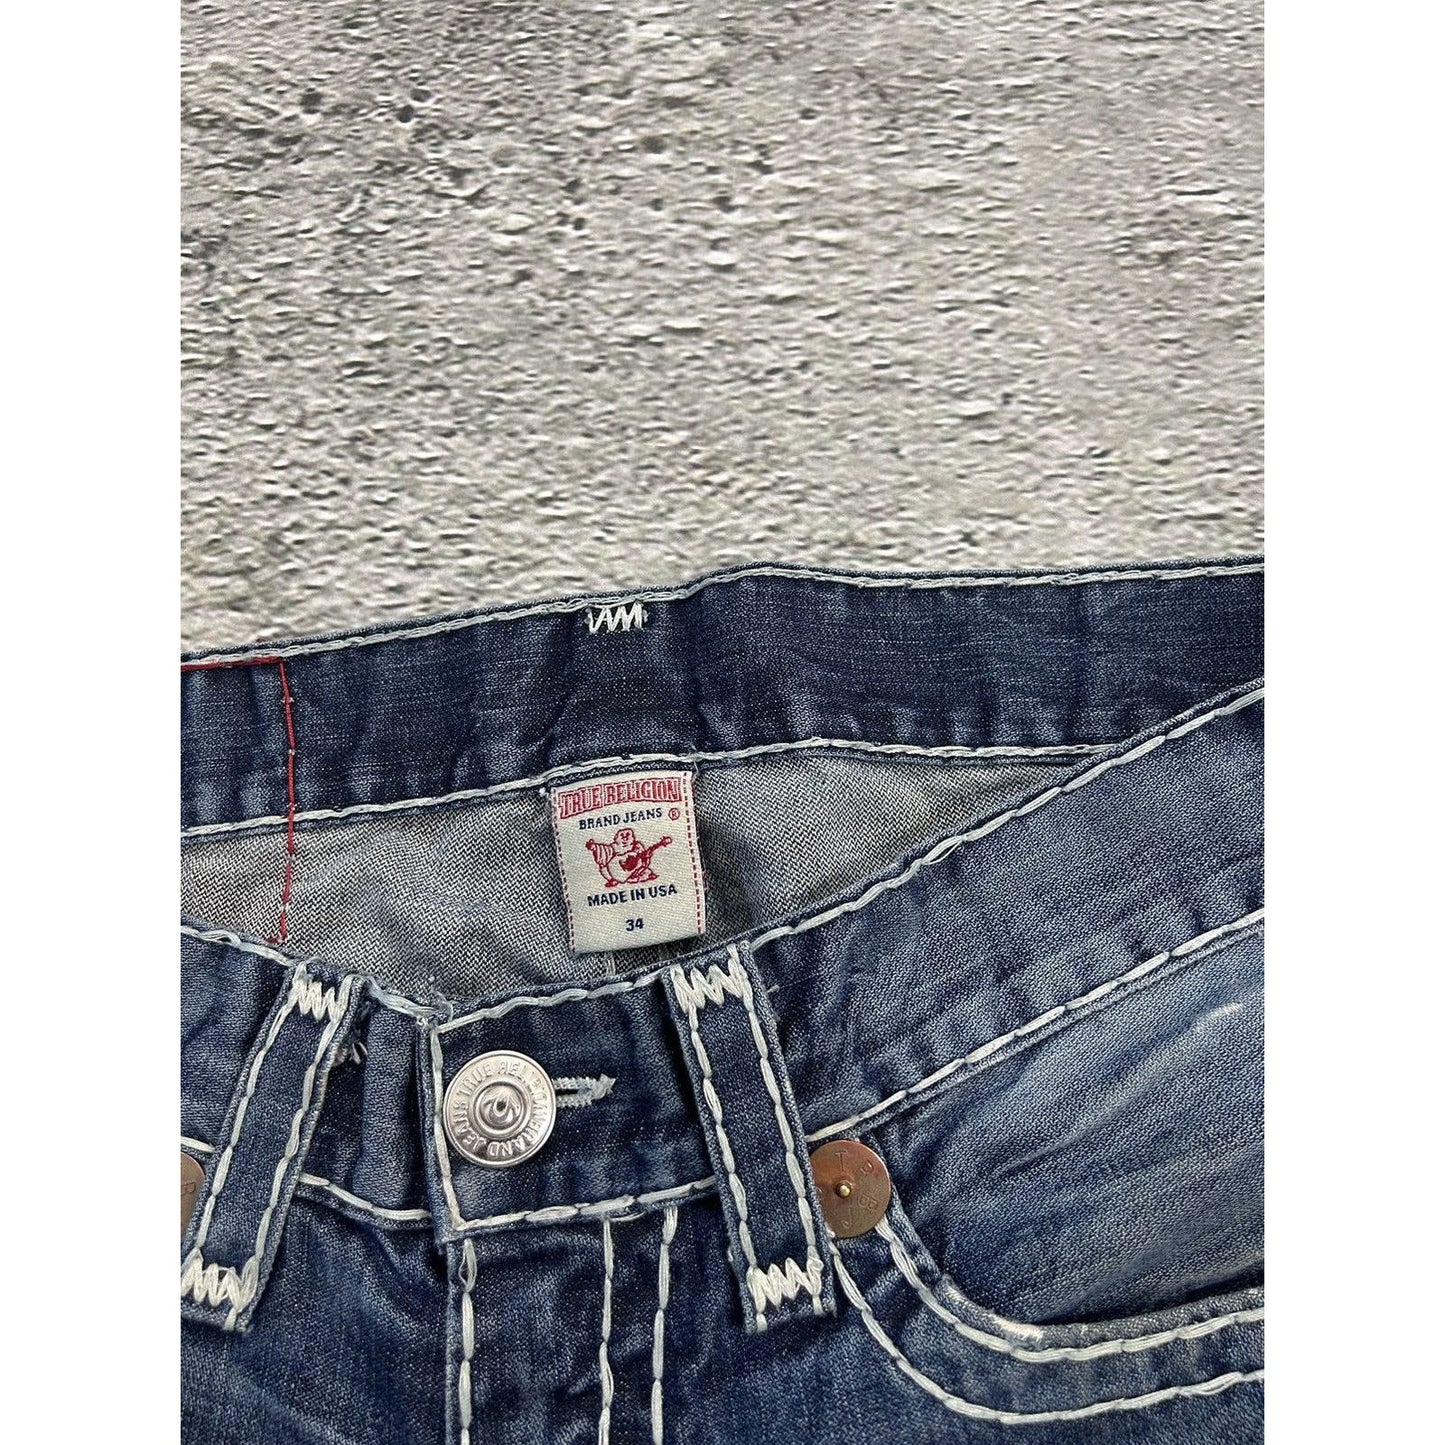 True Religion blue washed jeans white thick stitching Y2K